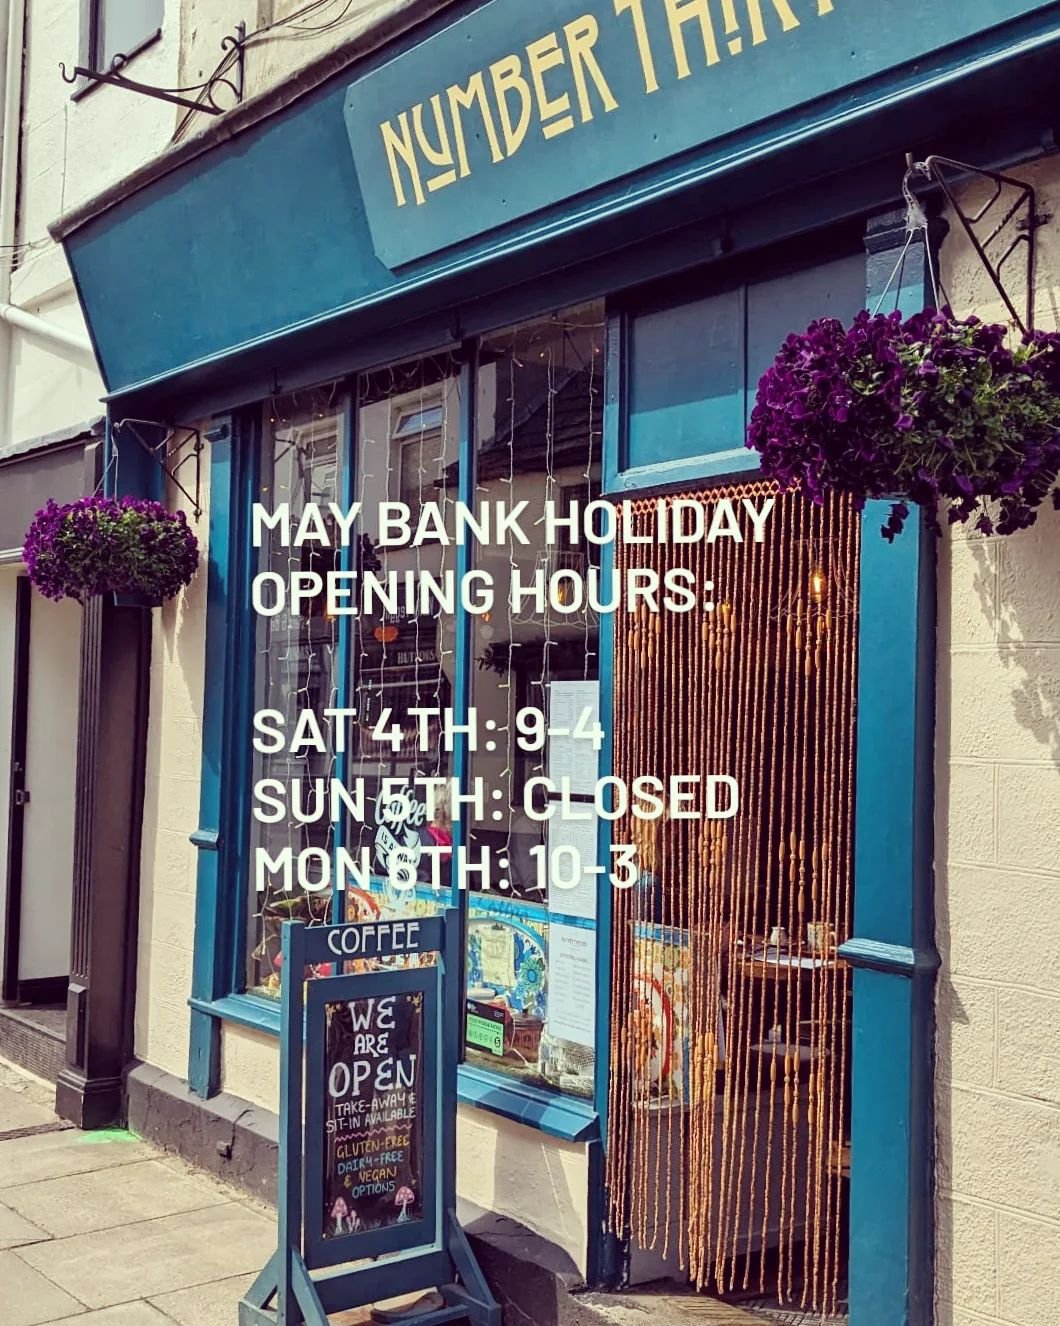 Early May Bank Holiday Opening Hours:

Saturday 4th: 9am til 4pm
Sunday 5th: CLOSED
Monday 6th: 10am til 3pm